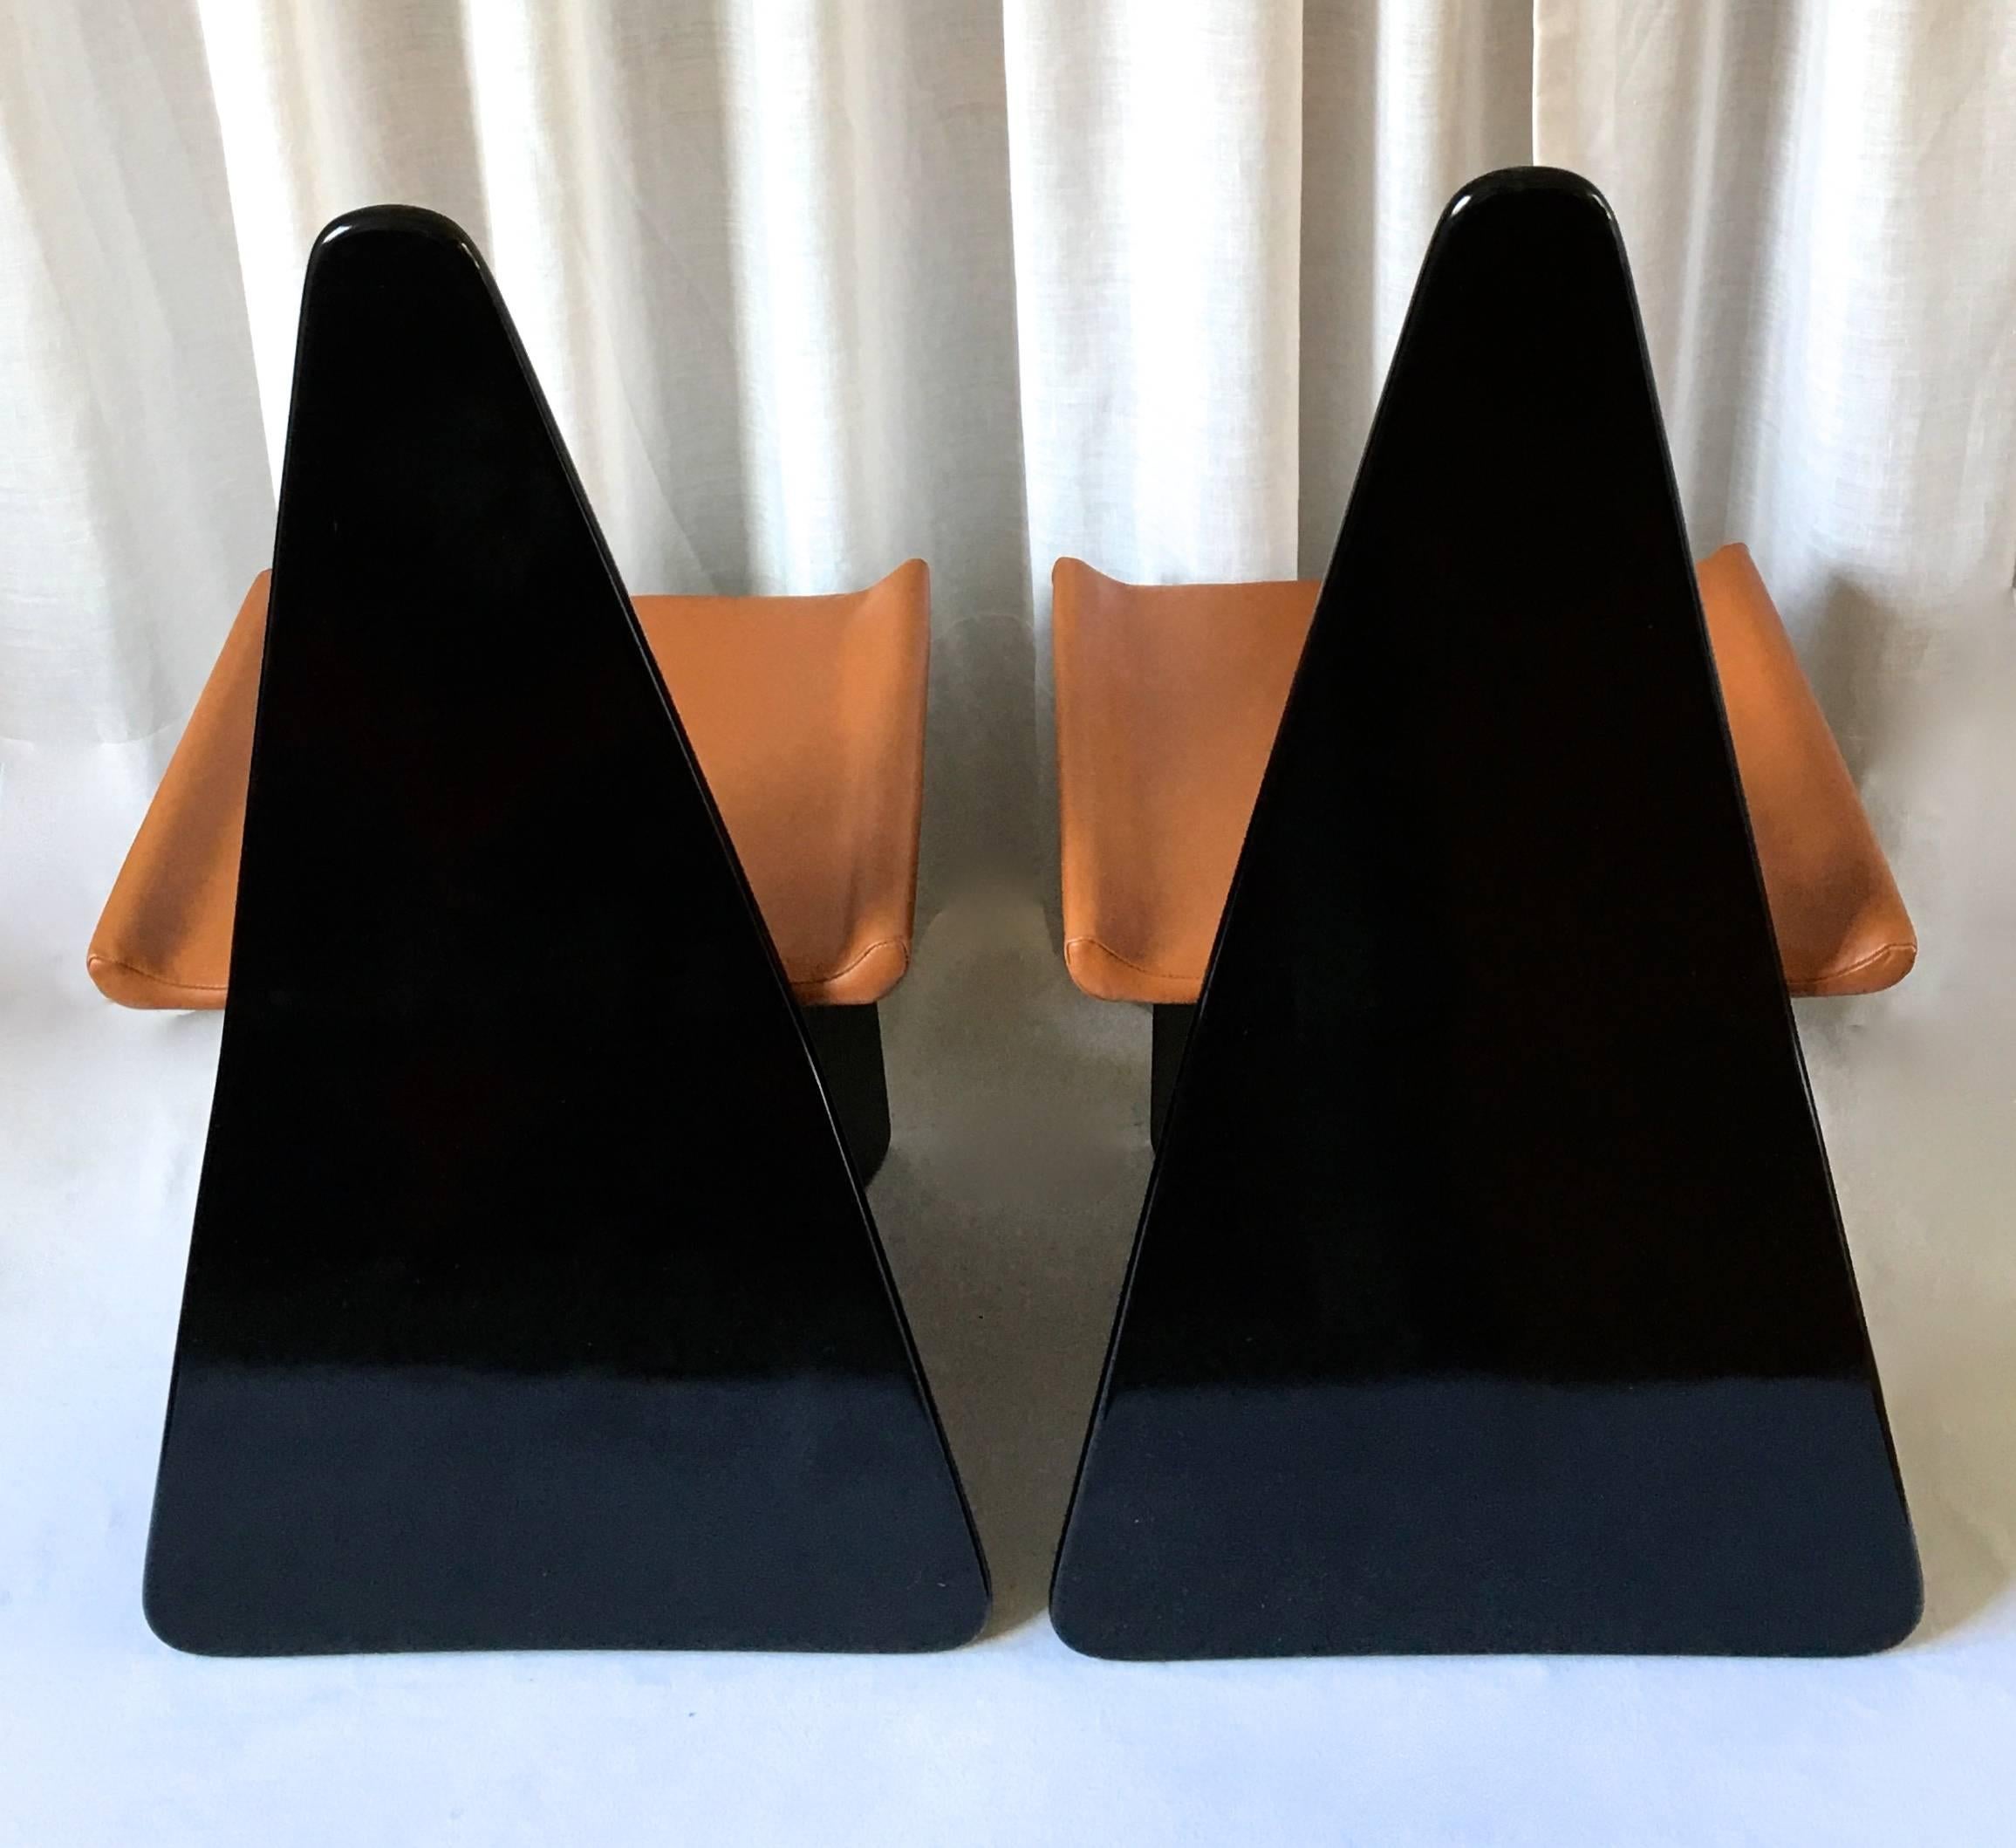 A pair of Claudio Salocchi chairs designed for Sormani, Italy, circa 1970-1975 as part of the serie Napoleone. Black lacquered wood and cognac brown leather. This is a rare 'Variante' edition.
Marked "Sormani" on the fabric on the bottom.